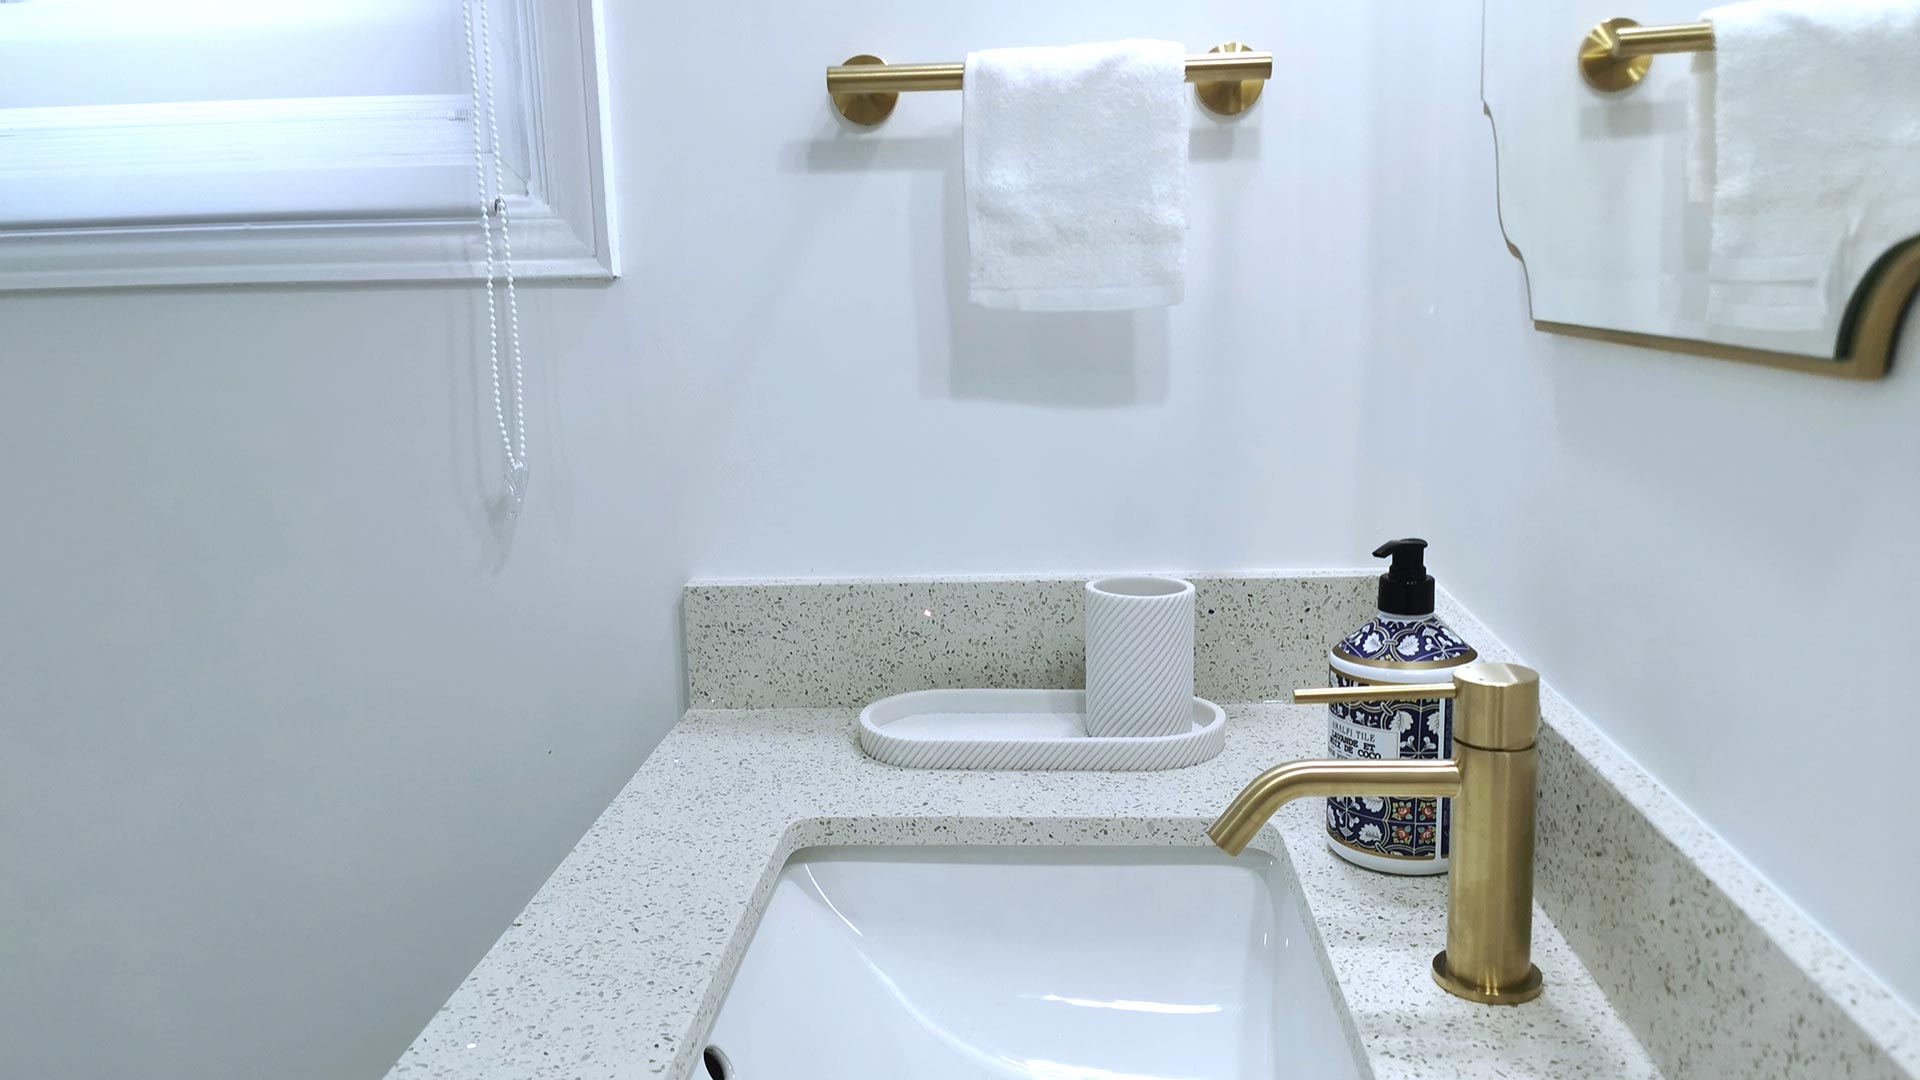 Master Bathroom Sink with gold faucet and towel holder